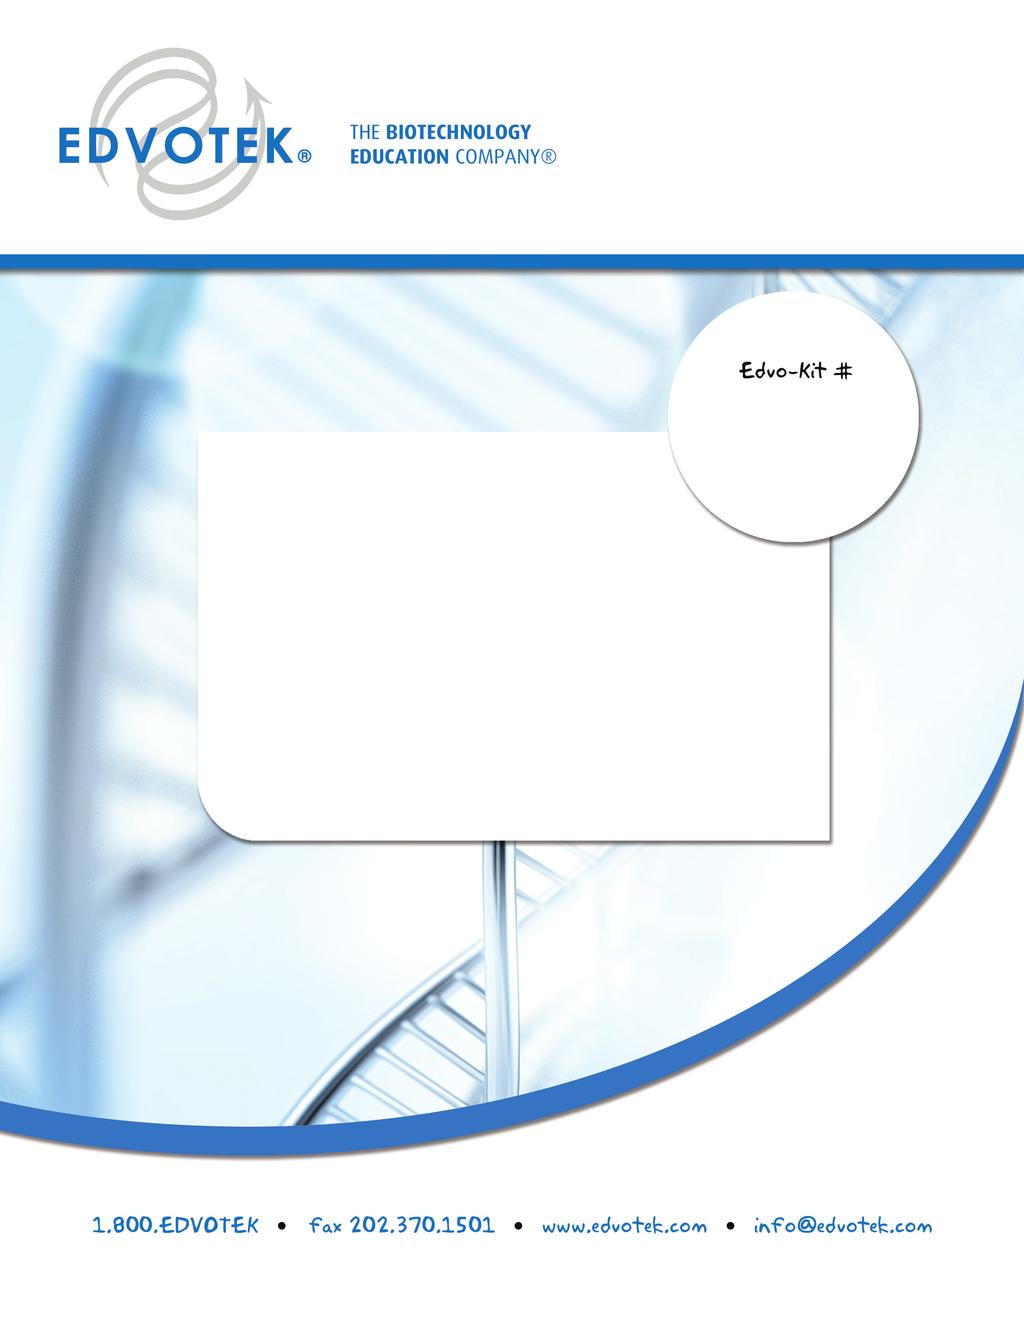 REVISED & UPDATED Edvo-Kit #962 Identification of Genetically Modified Foods Using PCR Experiment Objective: The objective of this experiment is to utilize PCR to identify genetically modified foods.